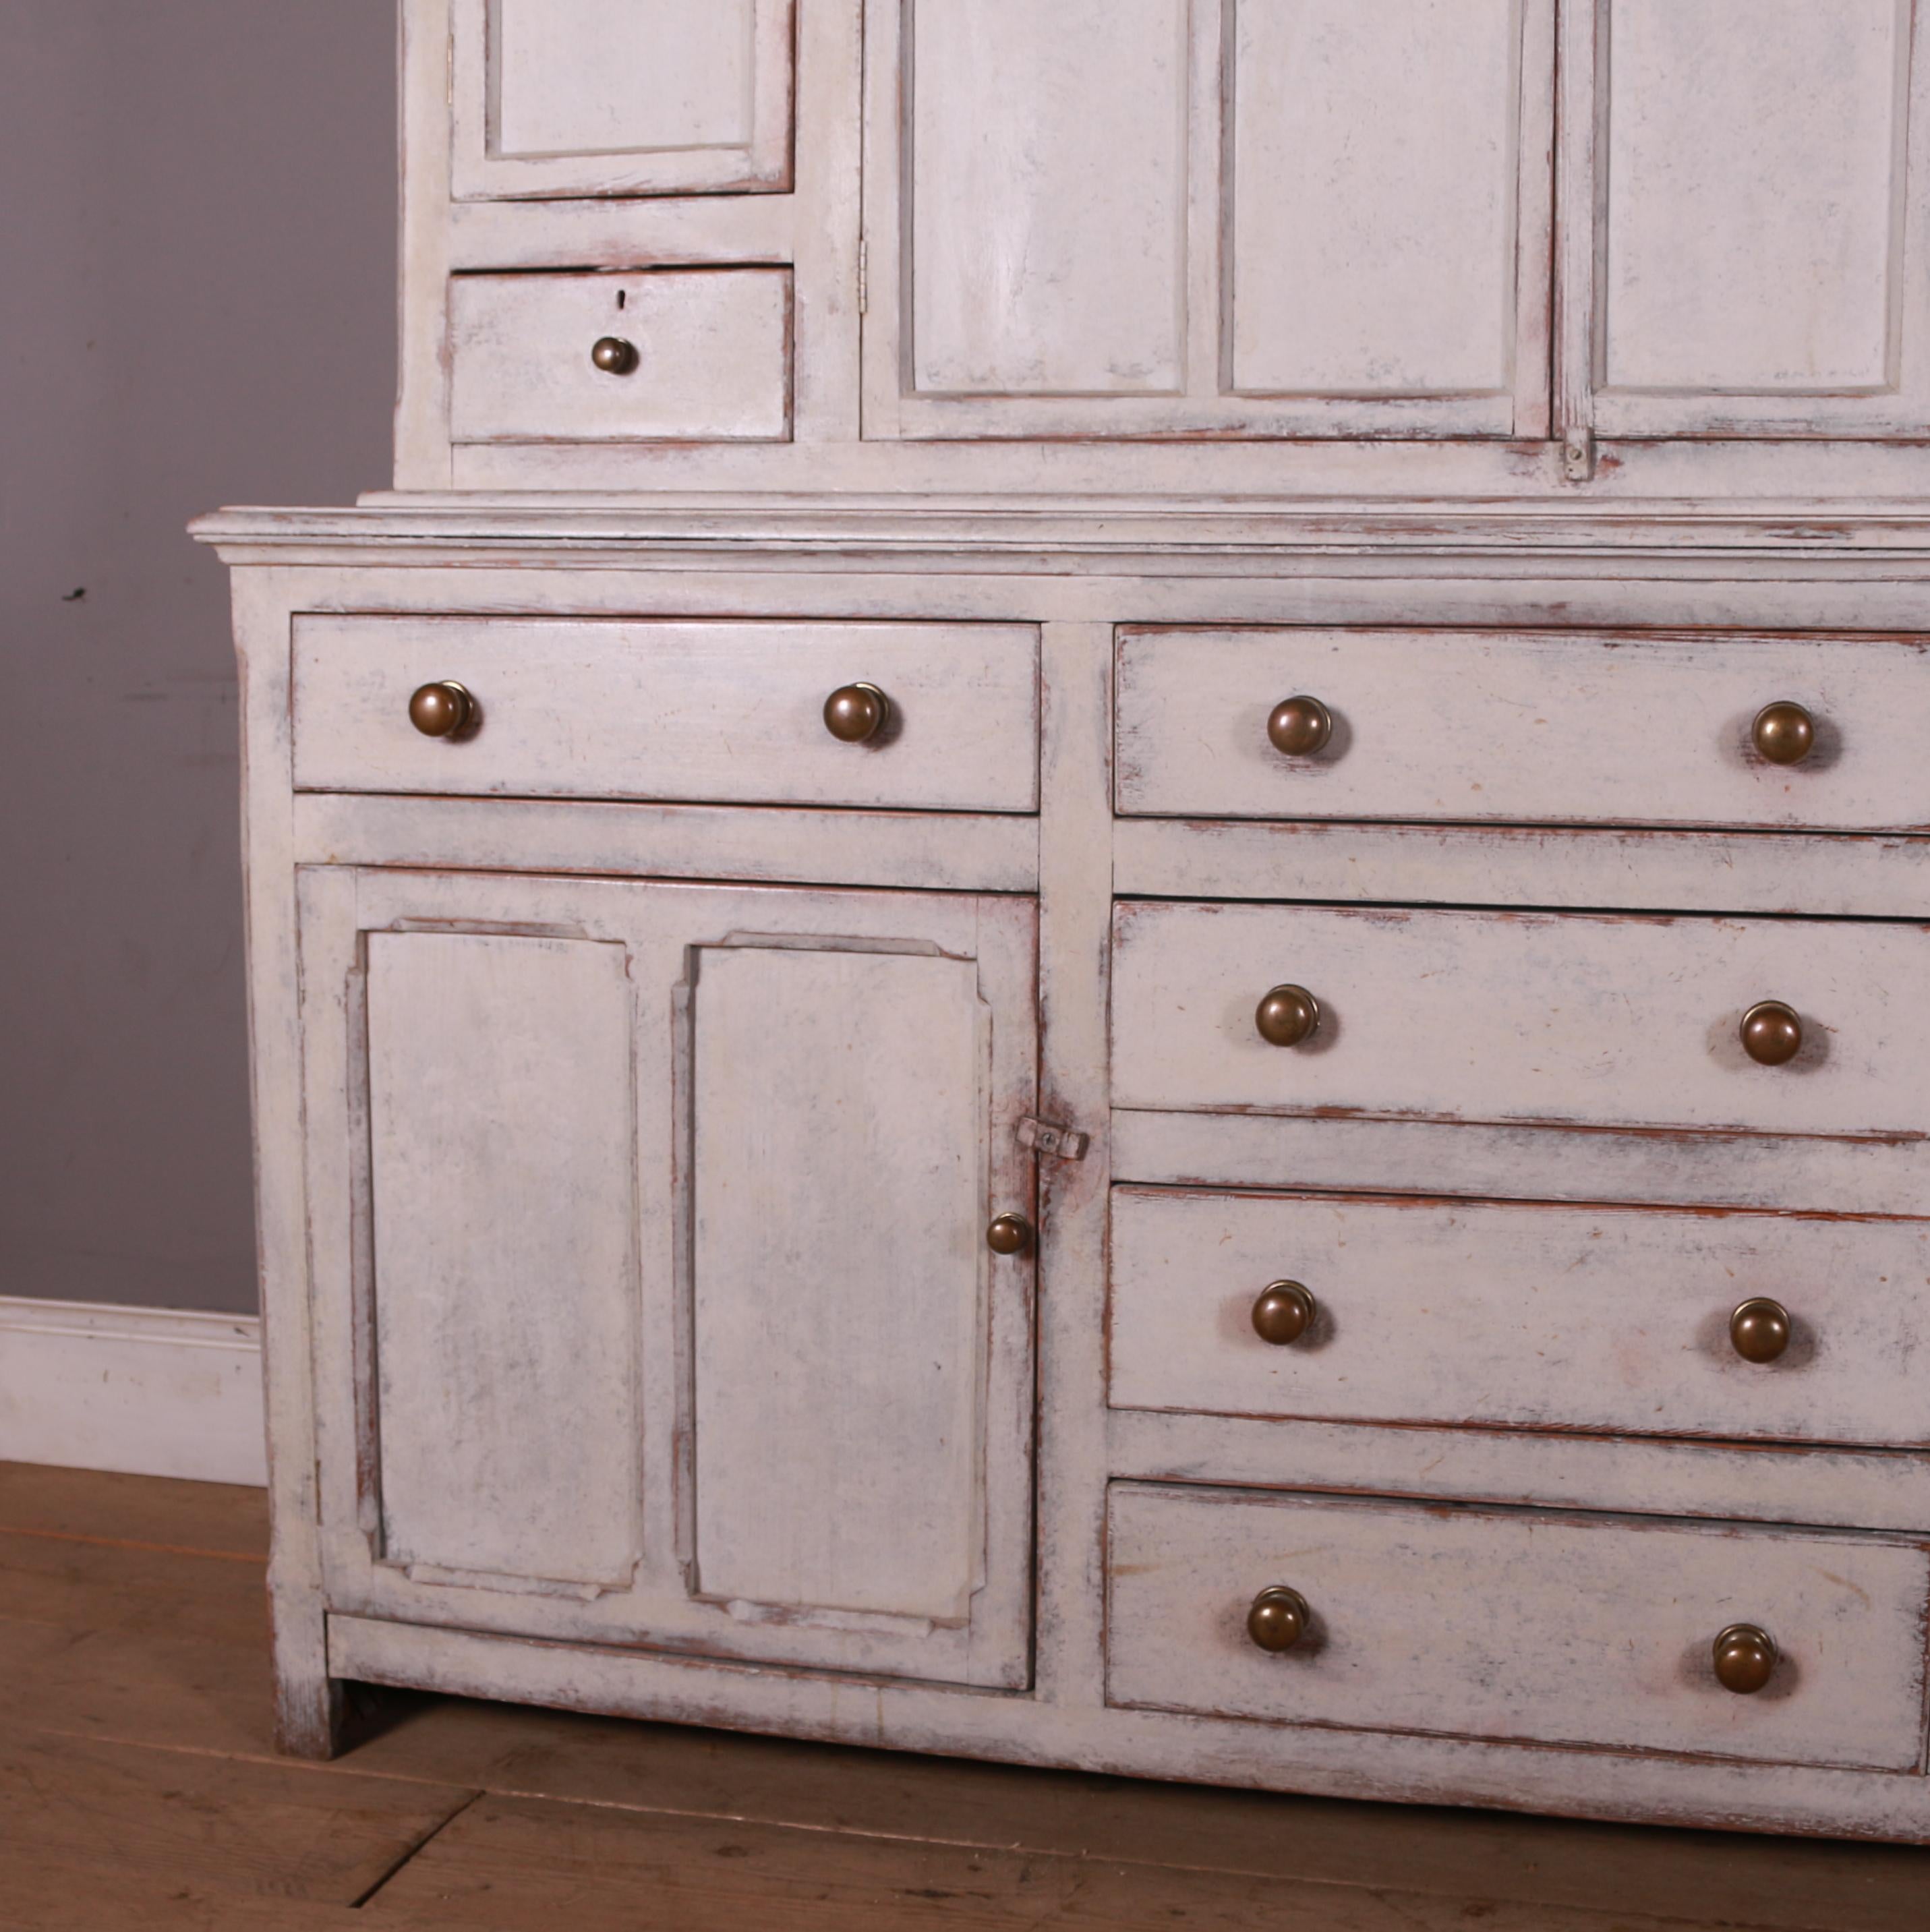 Very good Gothic painted pine 8 drawer housekeepers cupboard. 1840

All eight drawer work and run smoothly

Reference: 7405

Dimensions
74 inches (188 cms) Wide
20 inches (51 cms) Deep
84.5 inches (215 cms) High.